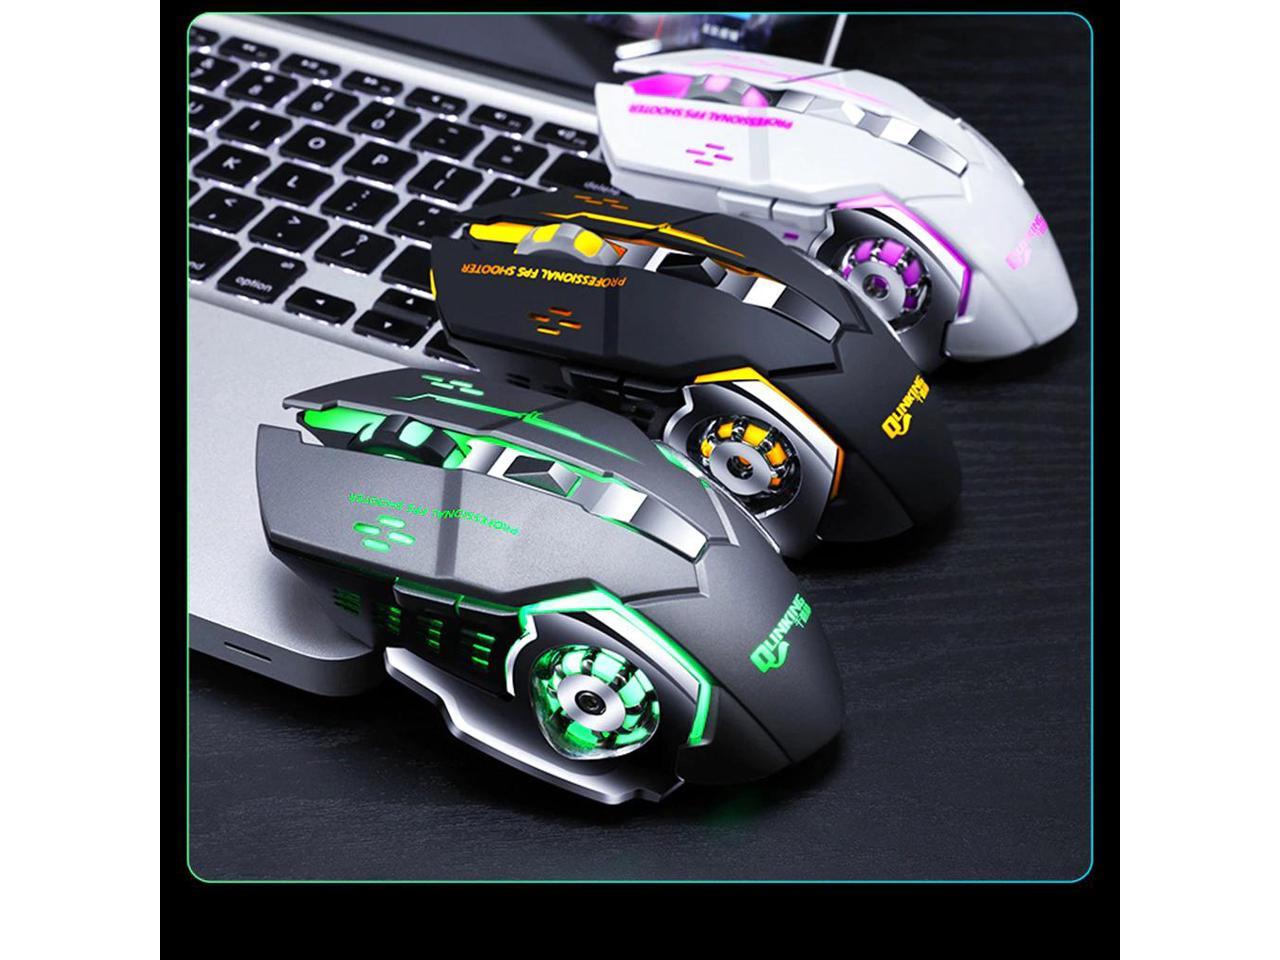 2.4GHz Mini 3200DPI Wireless Optical Gaming Mouse Mice For Computer PC Laptop US 